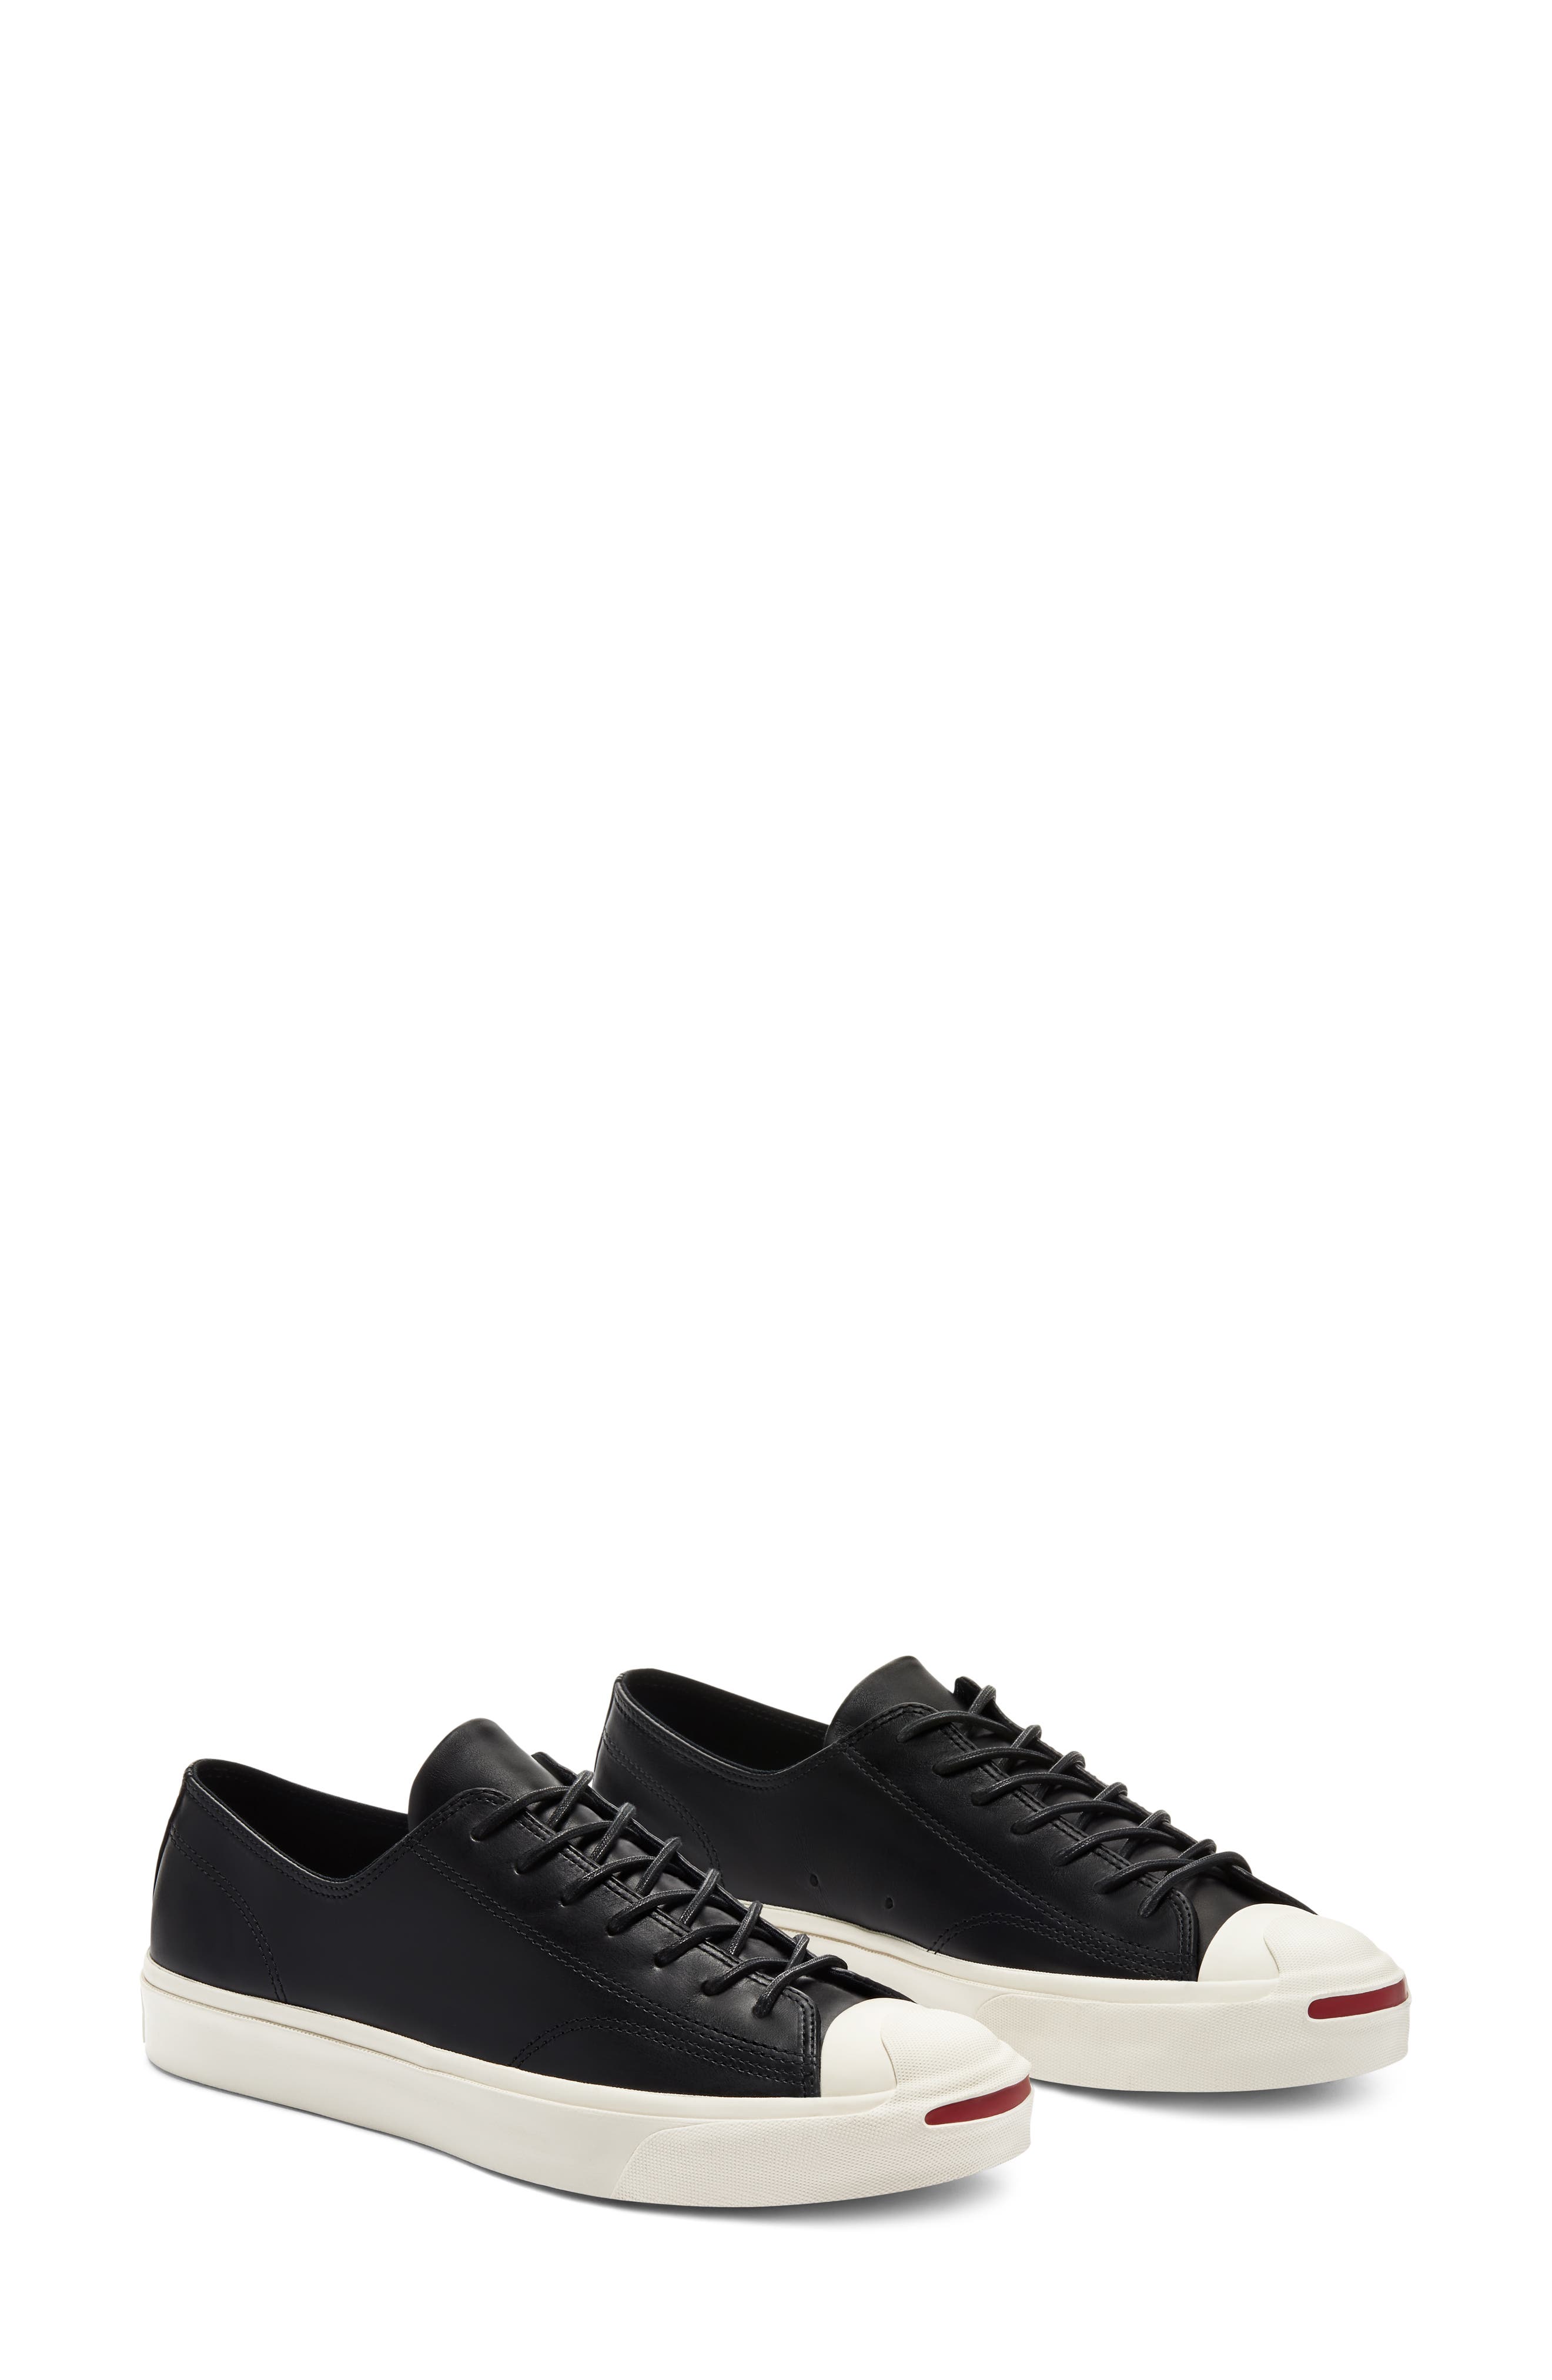 Converse Jack Purcell Leather Sneaker 